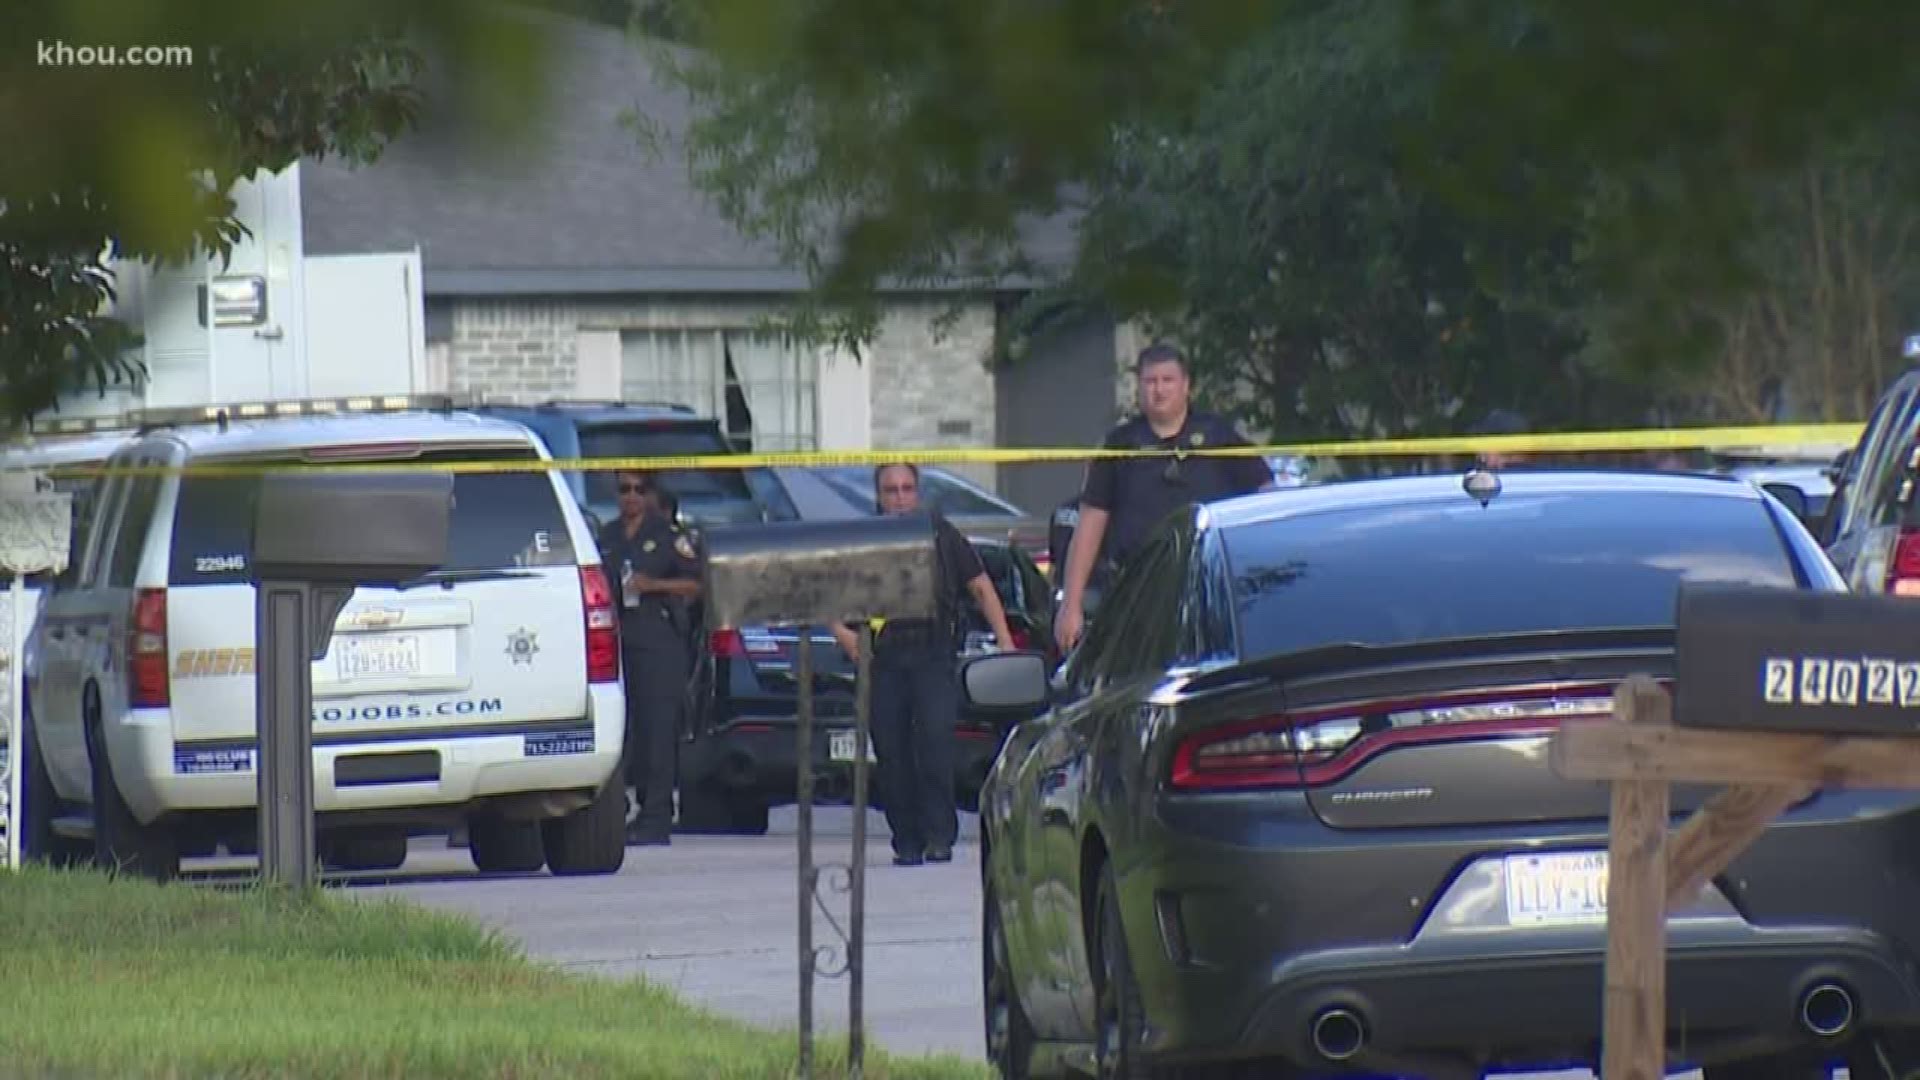 A Harris County Sheriff's deputy fatally shot a man Sunday afternoon while responding to a disturbance call in the Katy area.